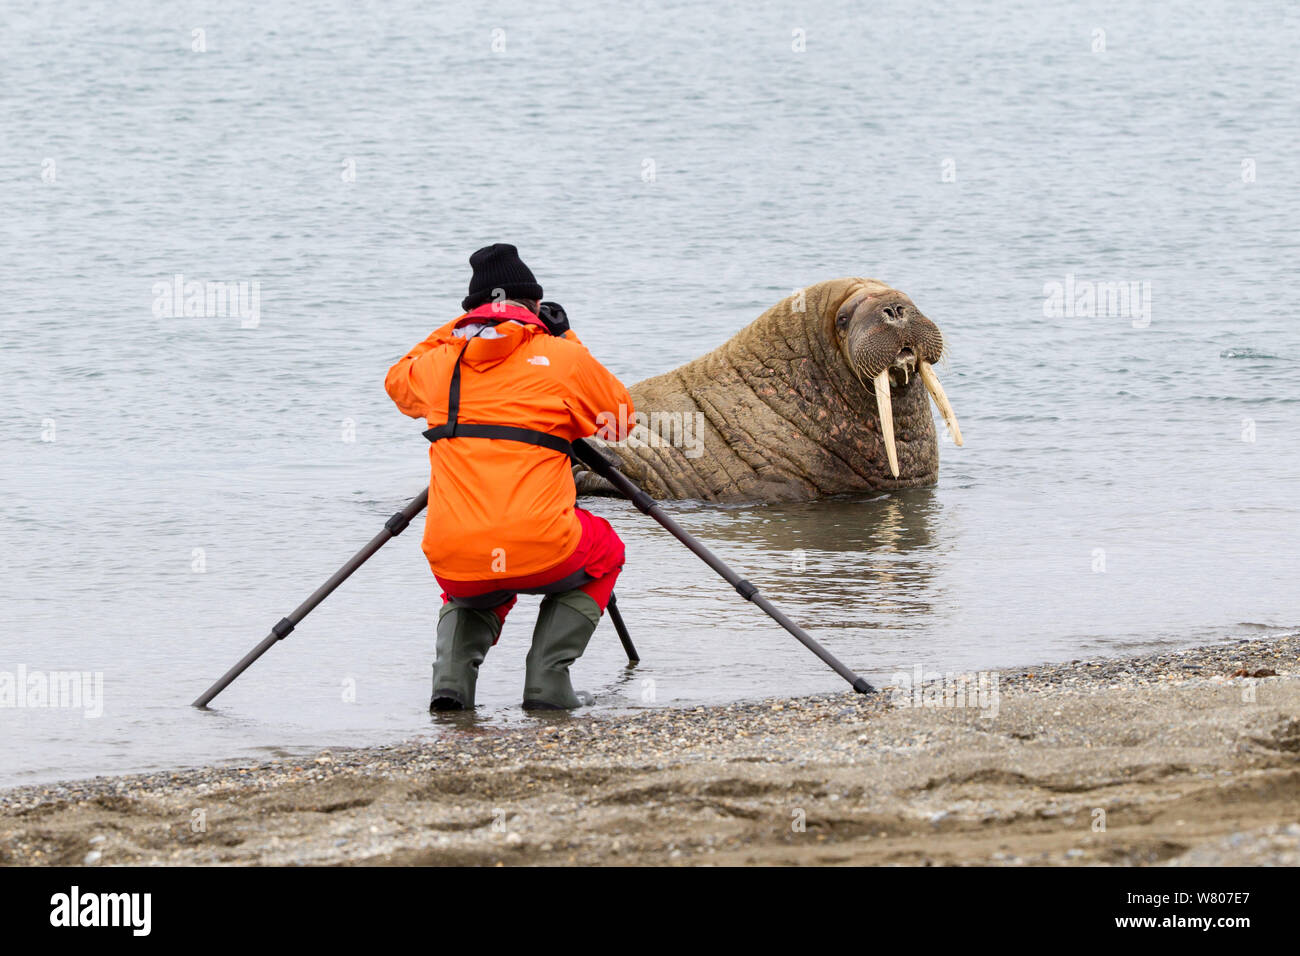 Photographer taking pictures of Walrus (Odobenus rosmarus) hauled out in shallow water, Spitsbergen, Svalbard Archipelago, Norway, Arctic Ocean. July. Stock Photo